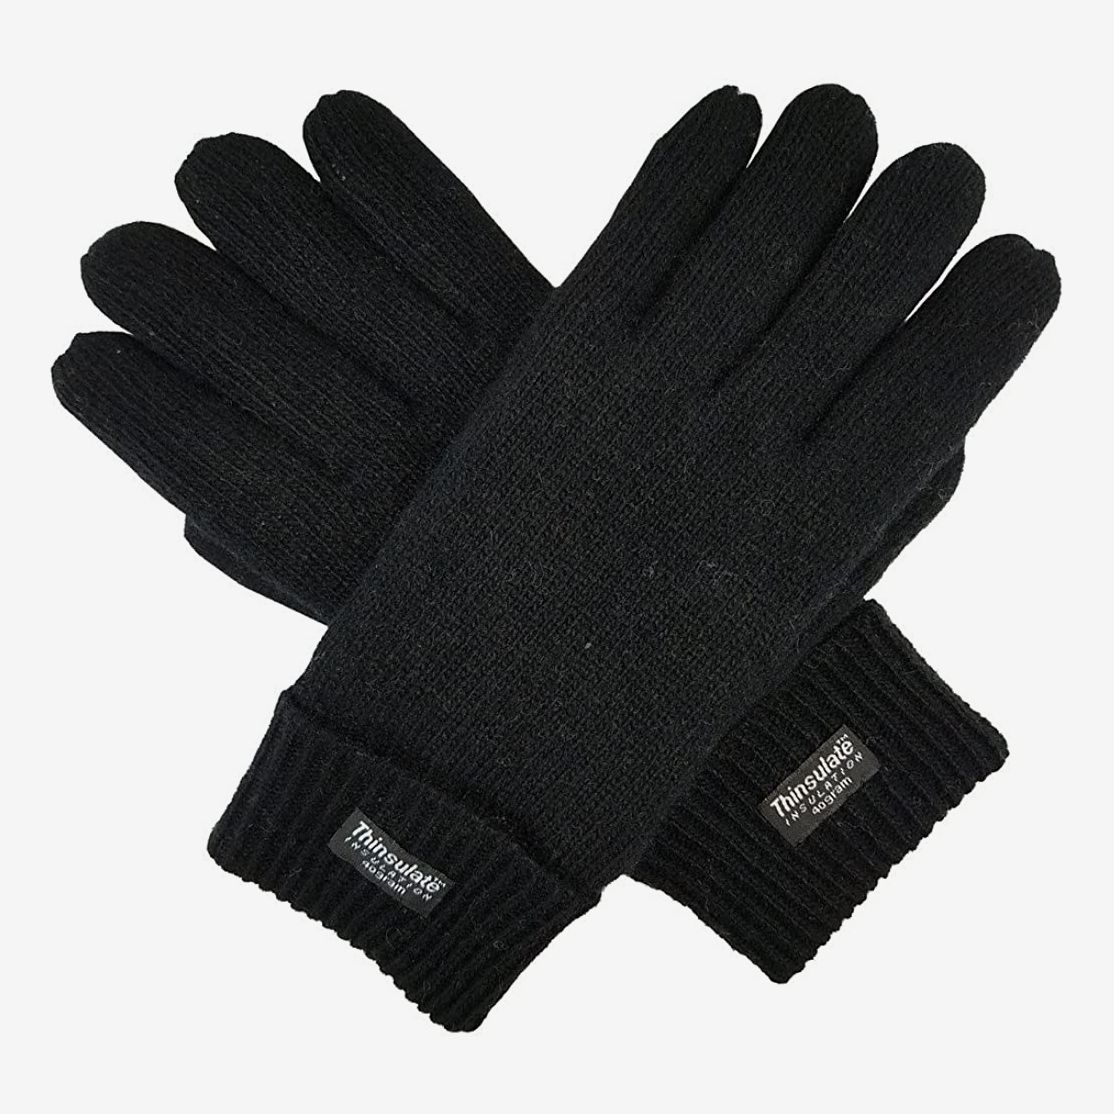 Mens Boys Knitted Gloves Thinsulate Lined Thermal Winter Work Adult Touch